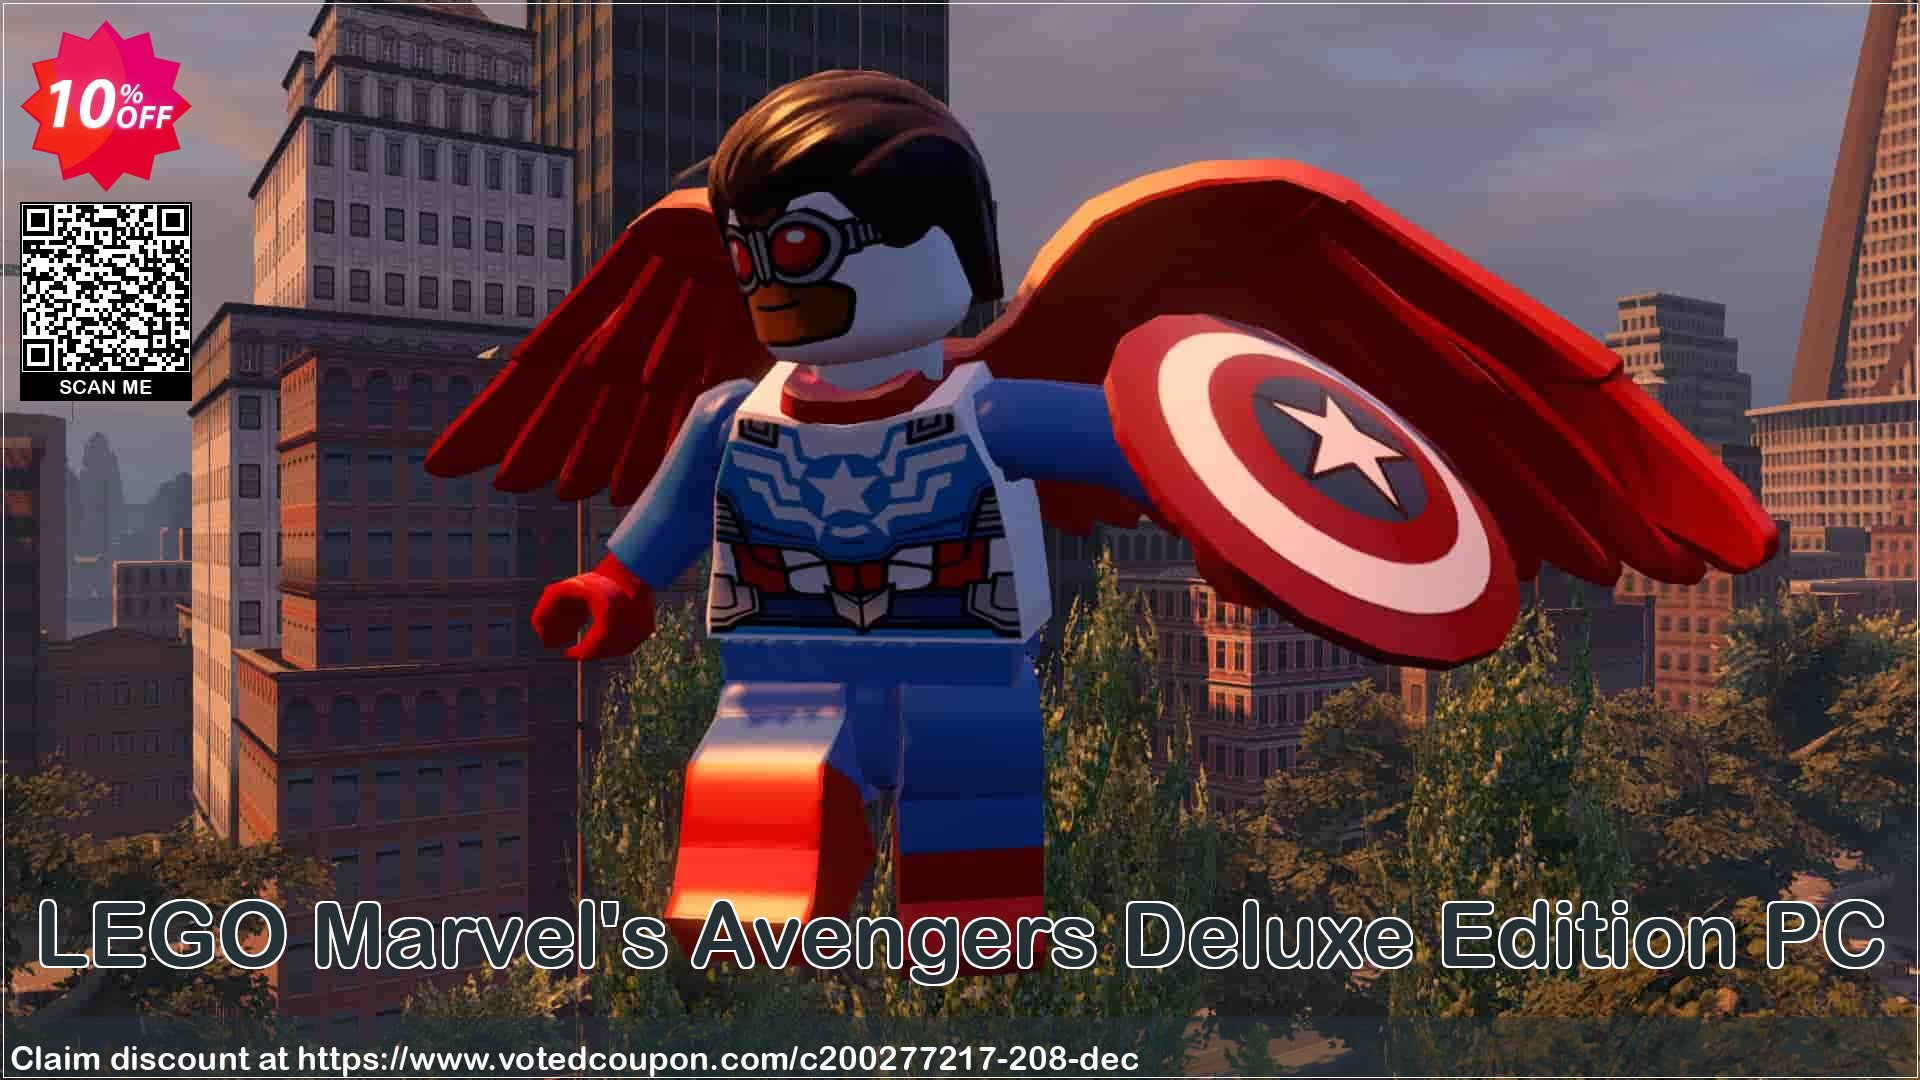 LEGO Marvel's Avengers Deluxe Edition PC voted-on promotion codes